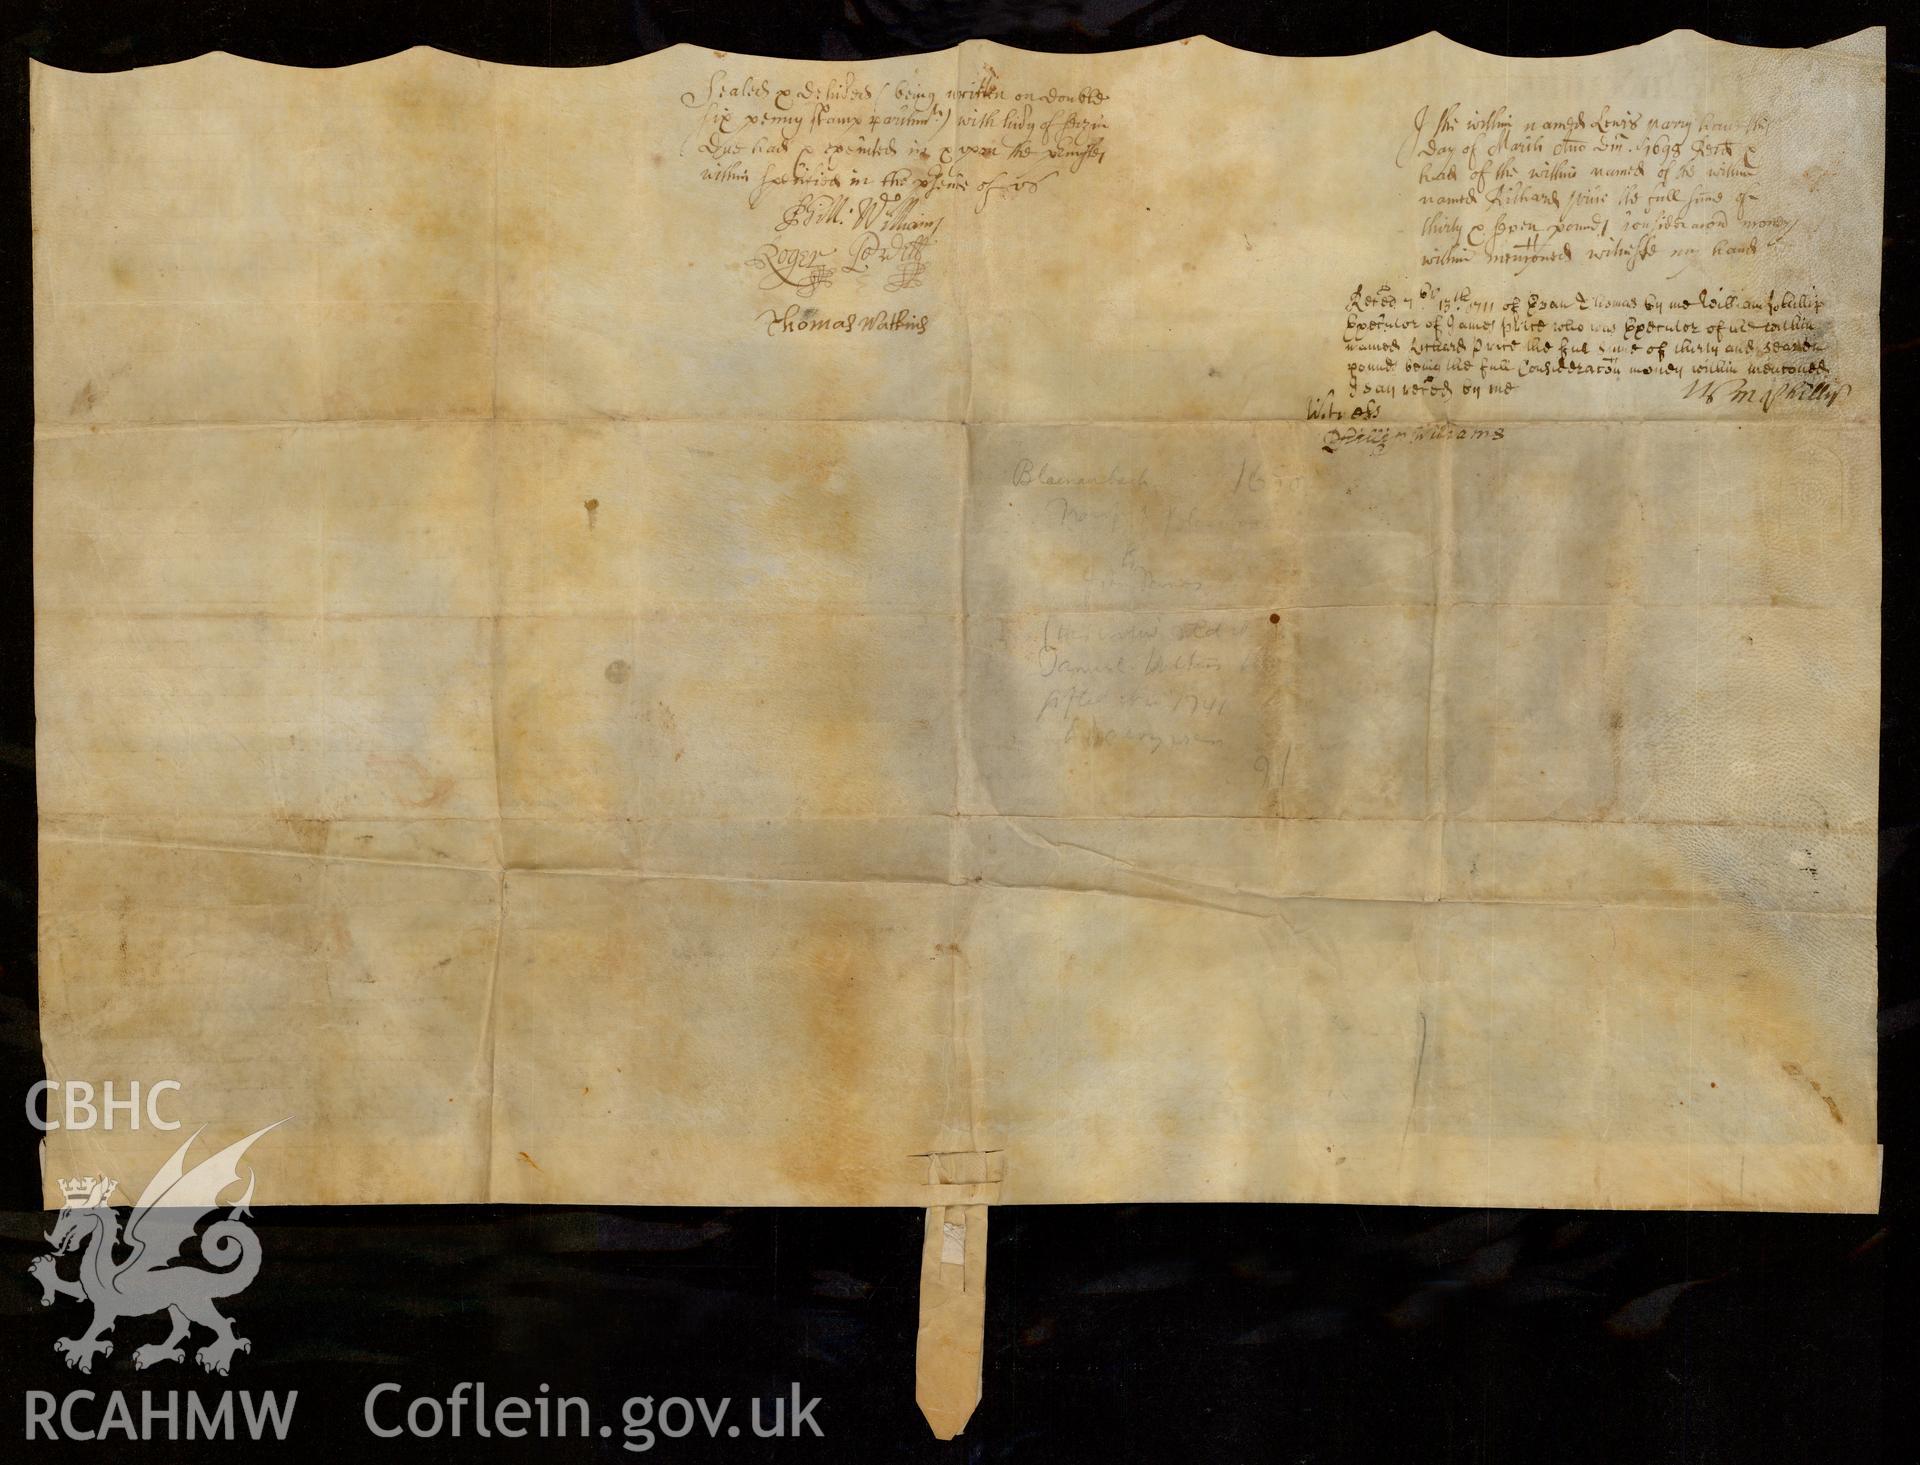 Indenture scrolls of Maes-yr-onen Chapel, loaned for copying by the United Reform Church. Scroll dated March 1741. Reverse view of scroll.